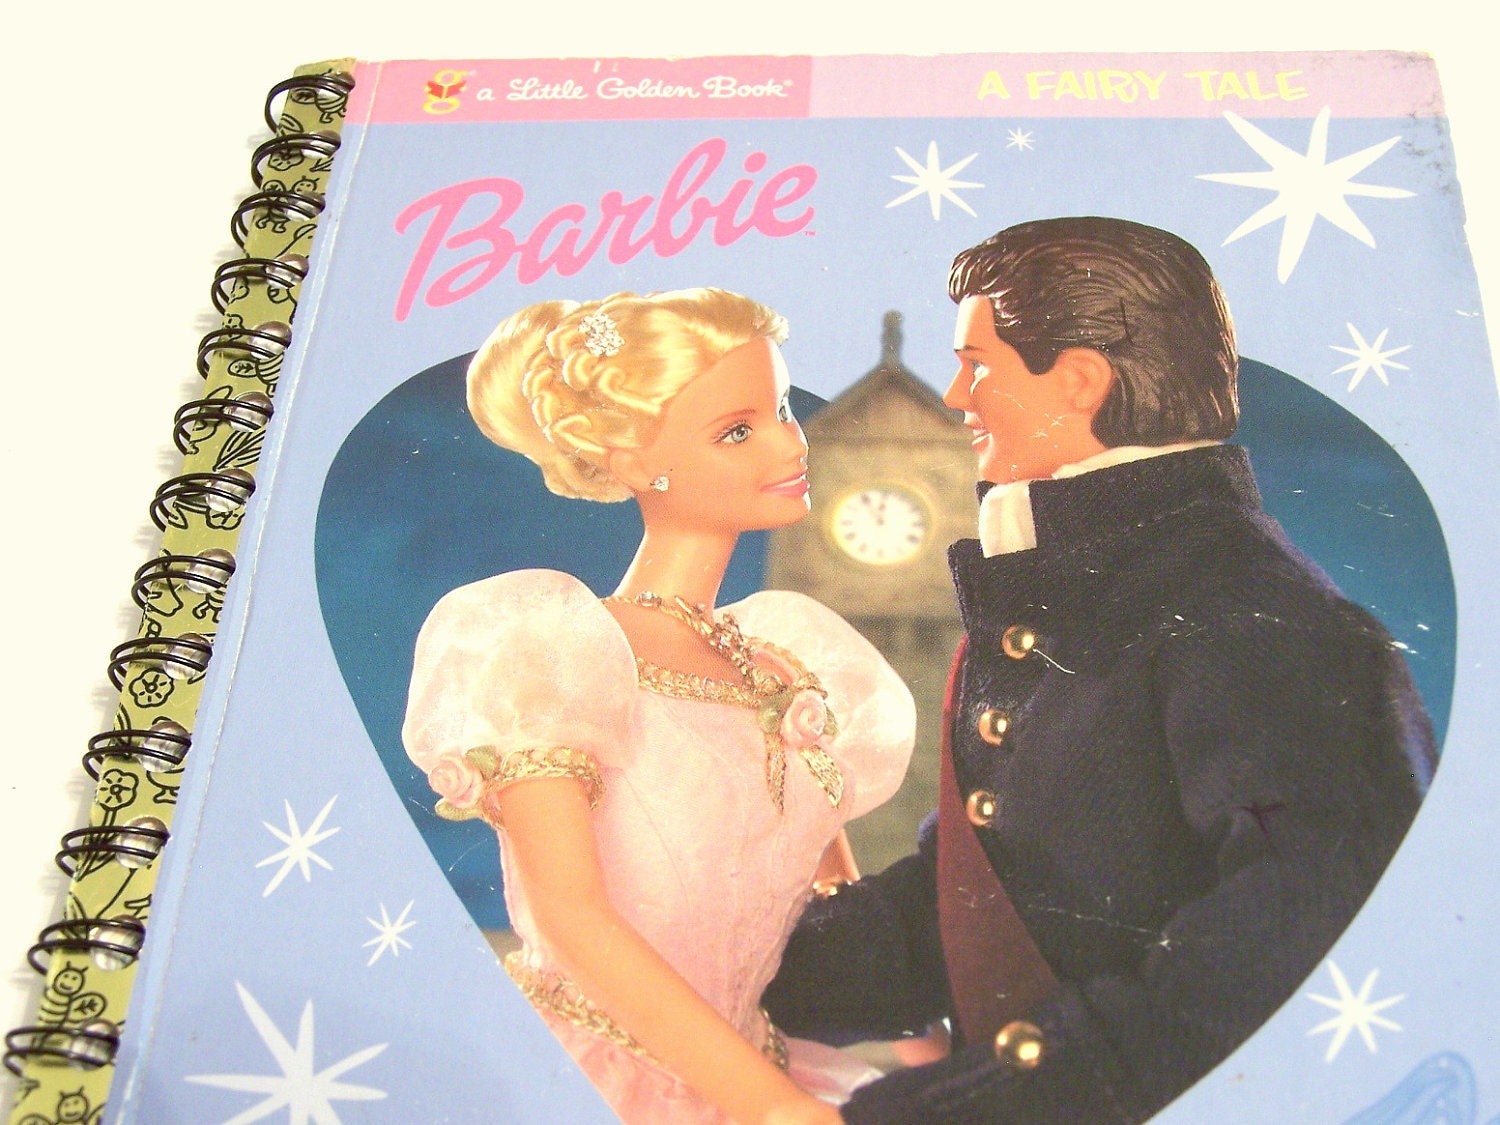 Upcycled Golden Book Notebook Upcycled Barbie Notebook Upcycled Childrens Book:  Barbie as Cinderella Notebook